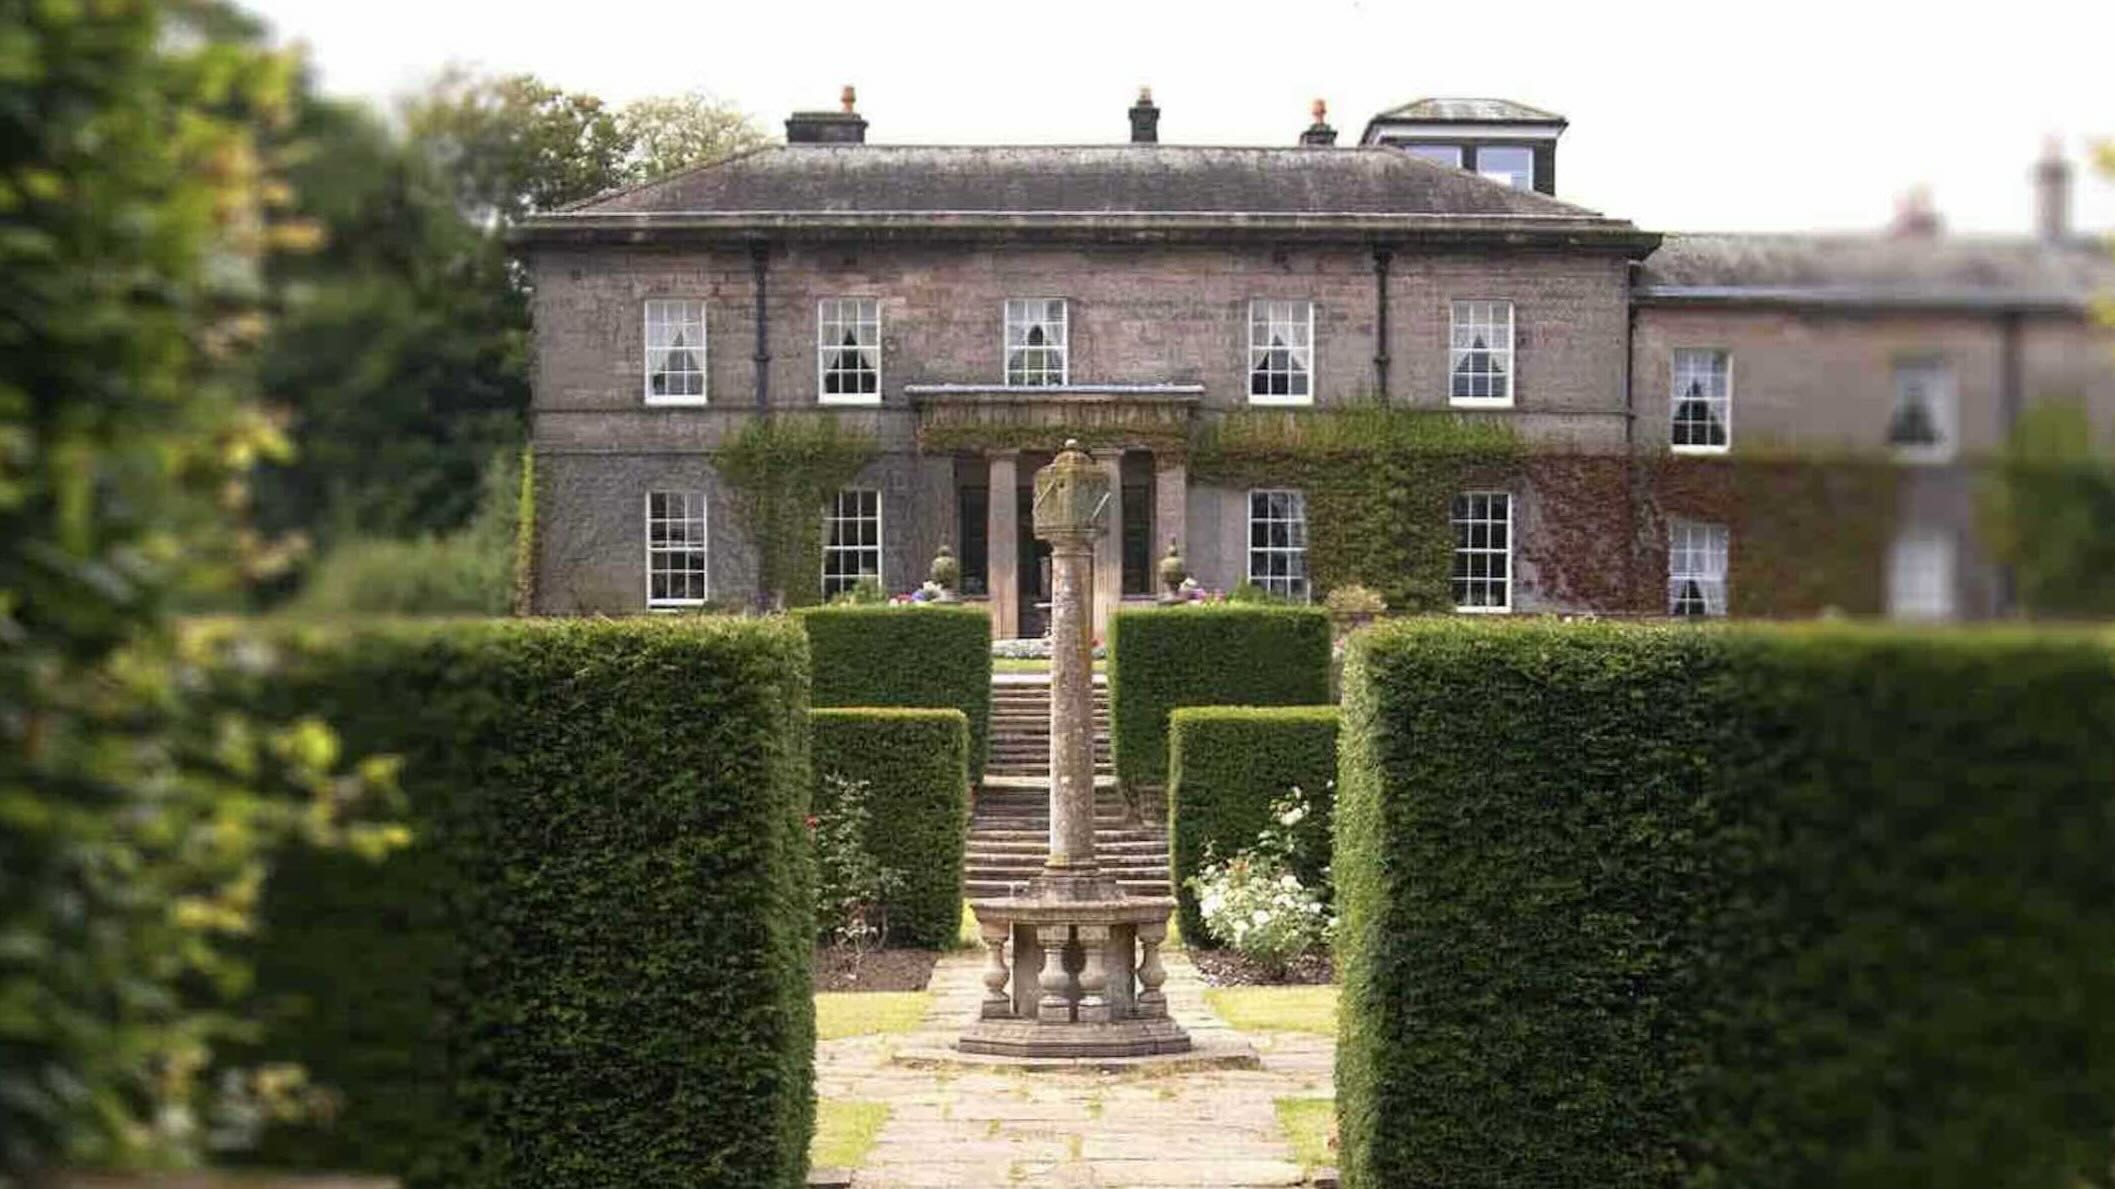 The grounds of Doxford Hall